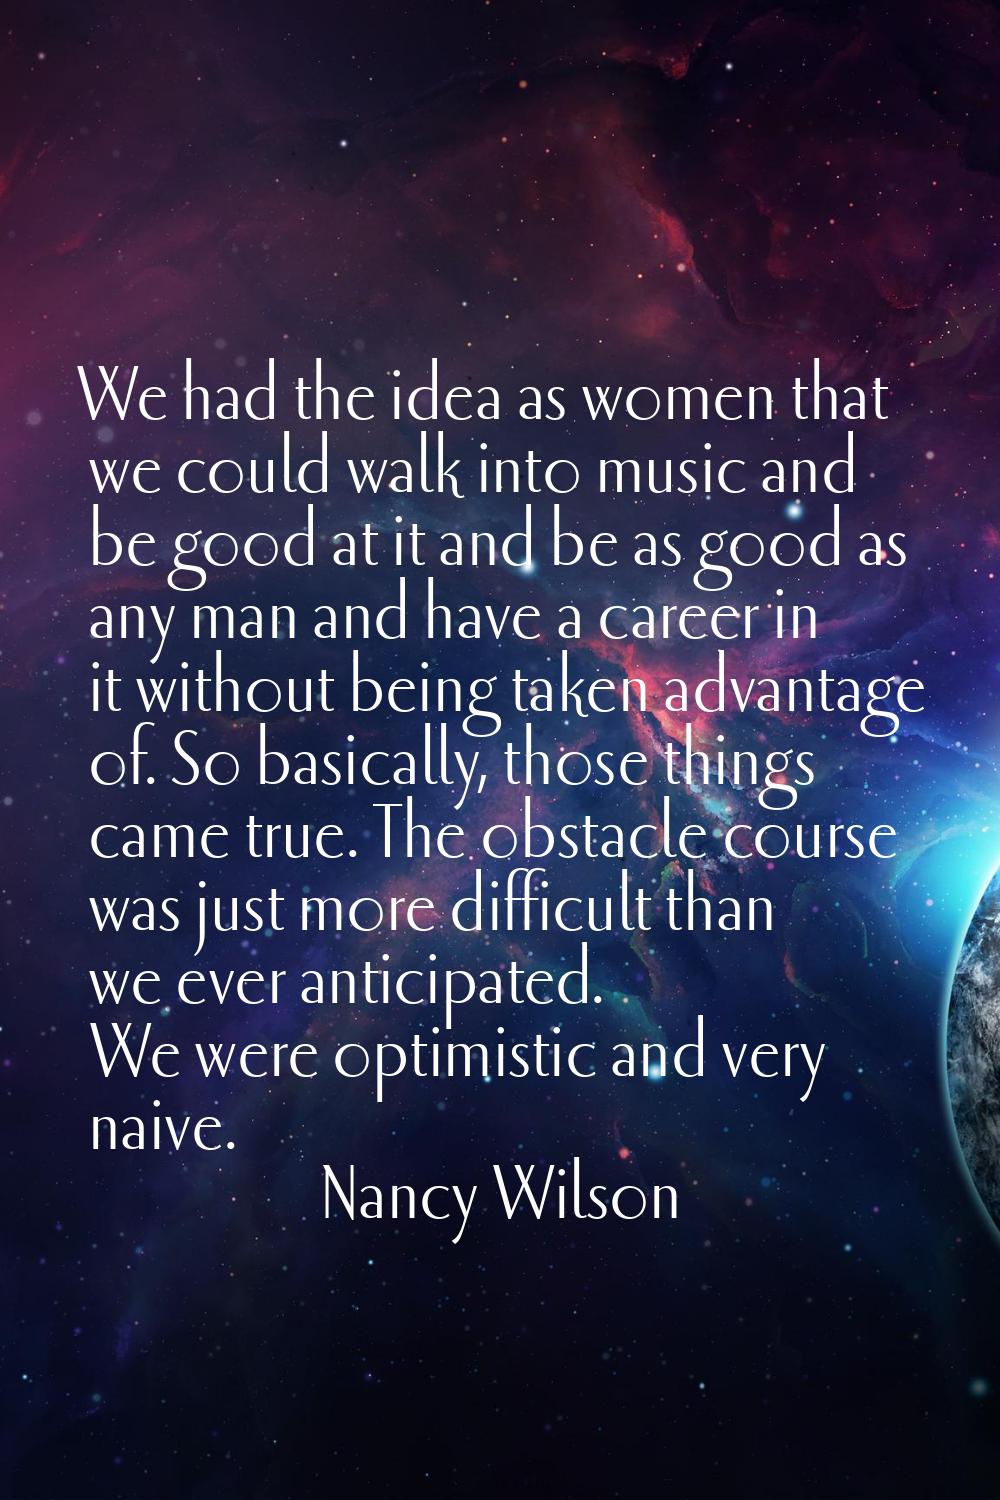 We had the idea as women that we could walk into music and be good at it and be as good as any man 